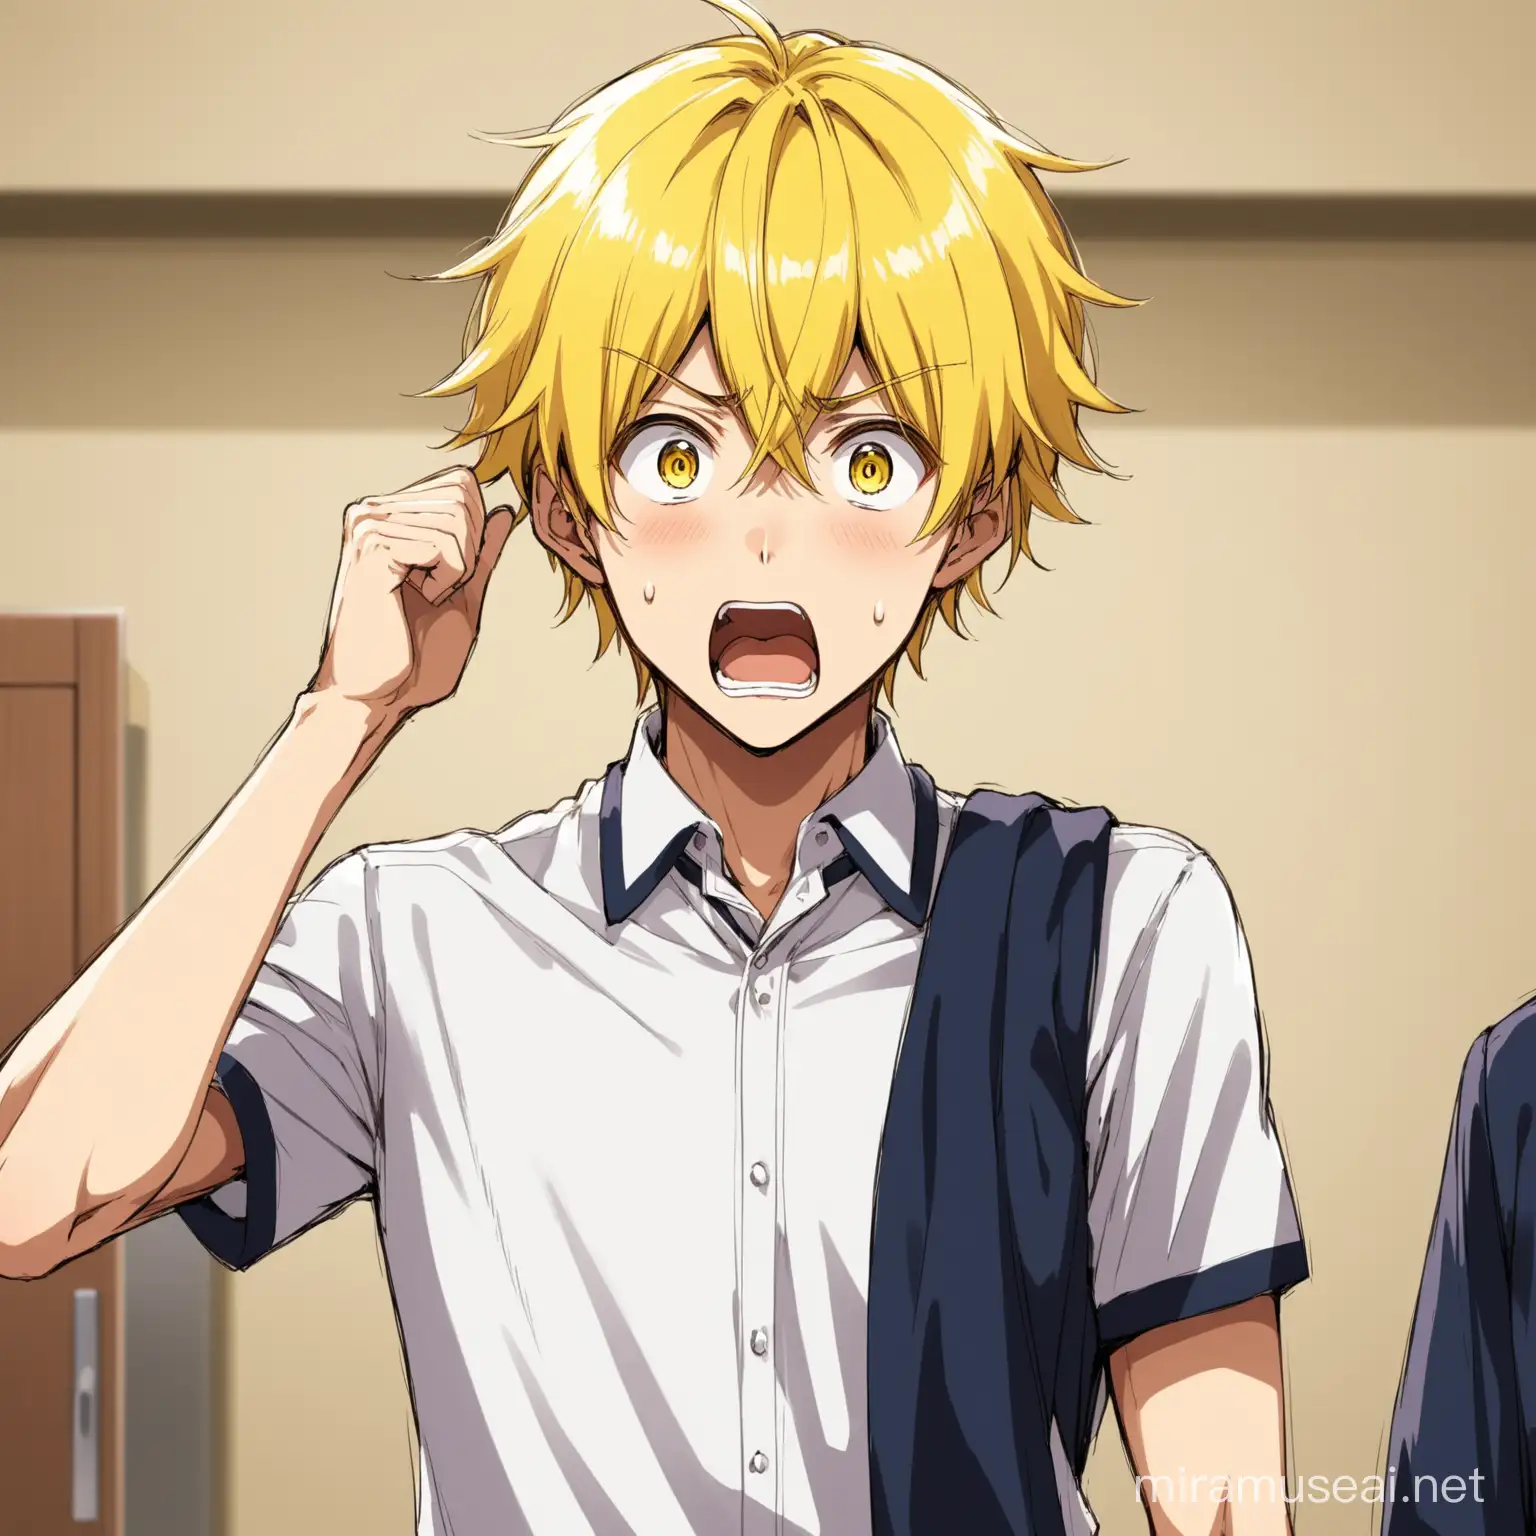 College Student with Yellow Hair in Anime Uniform Expressing Shock and Confusion